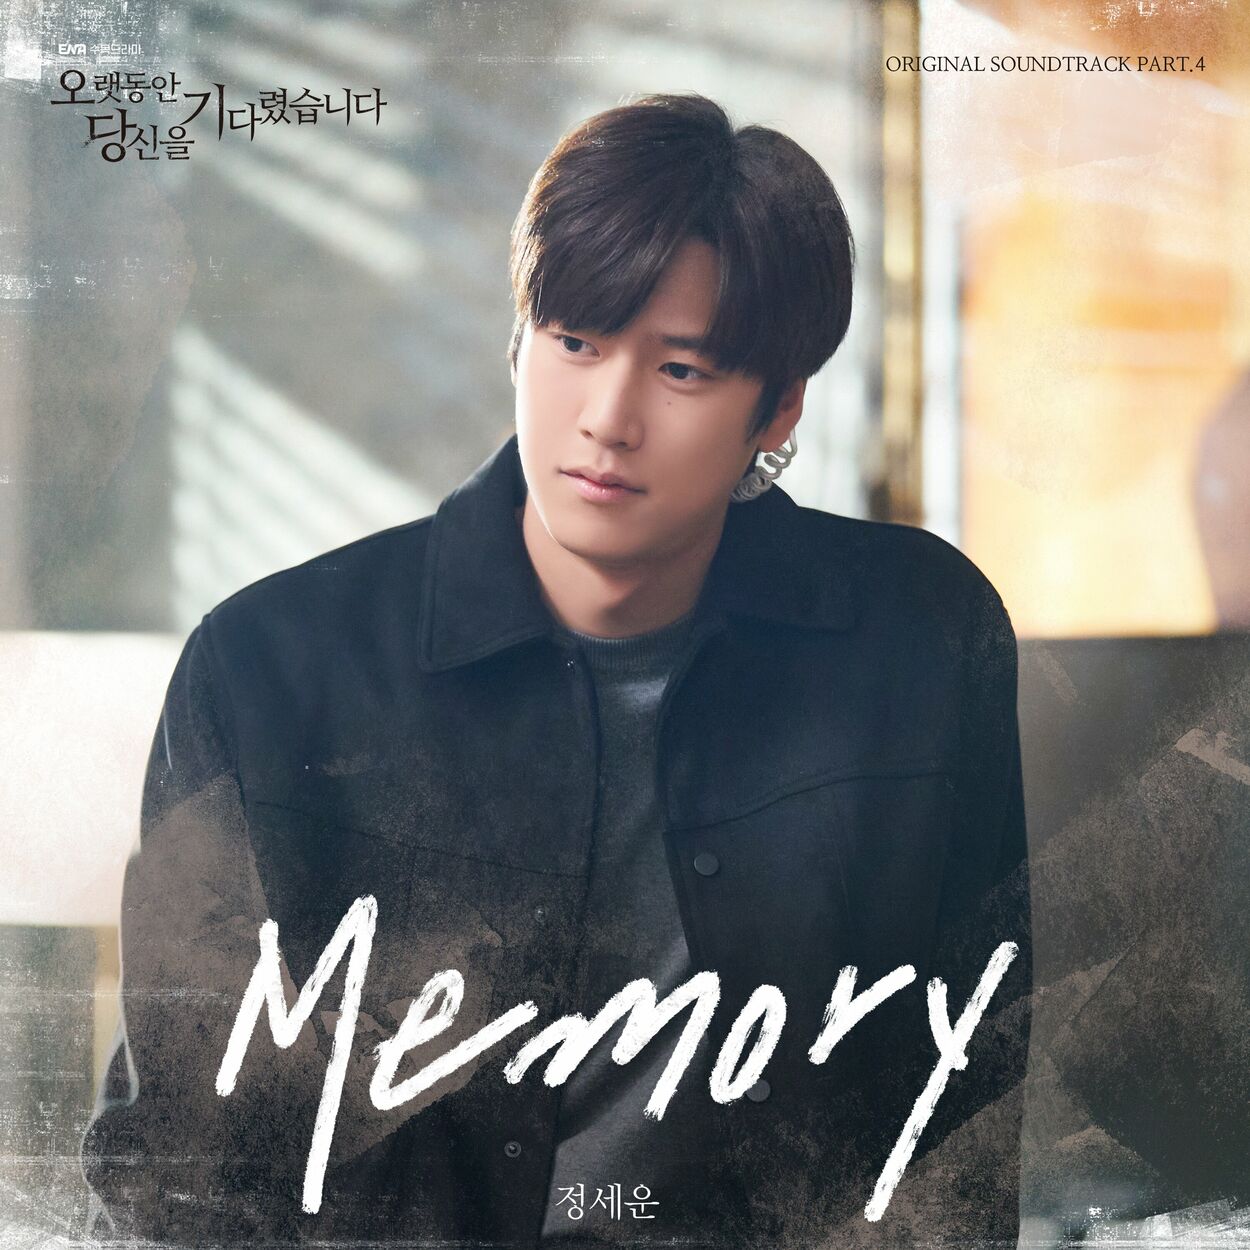 JEONG SEWOON – Longing for You OST, Pt. 4